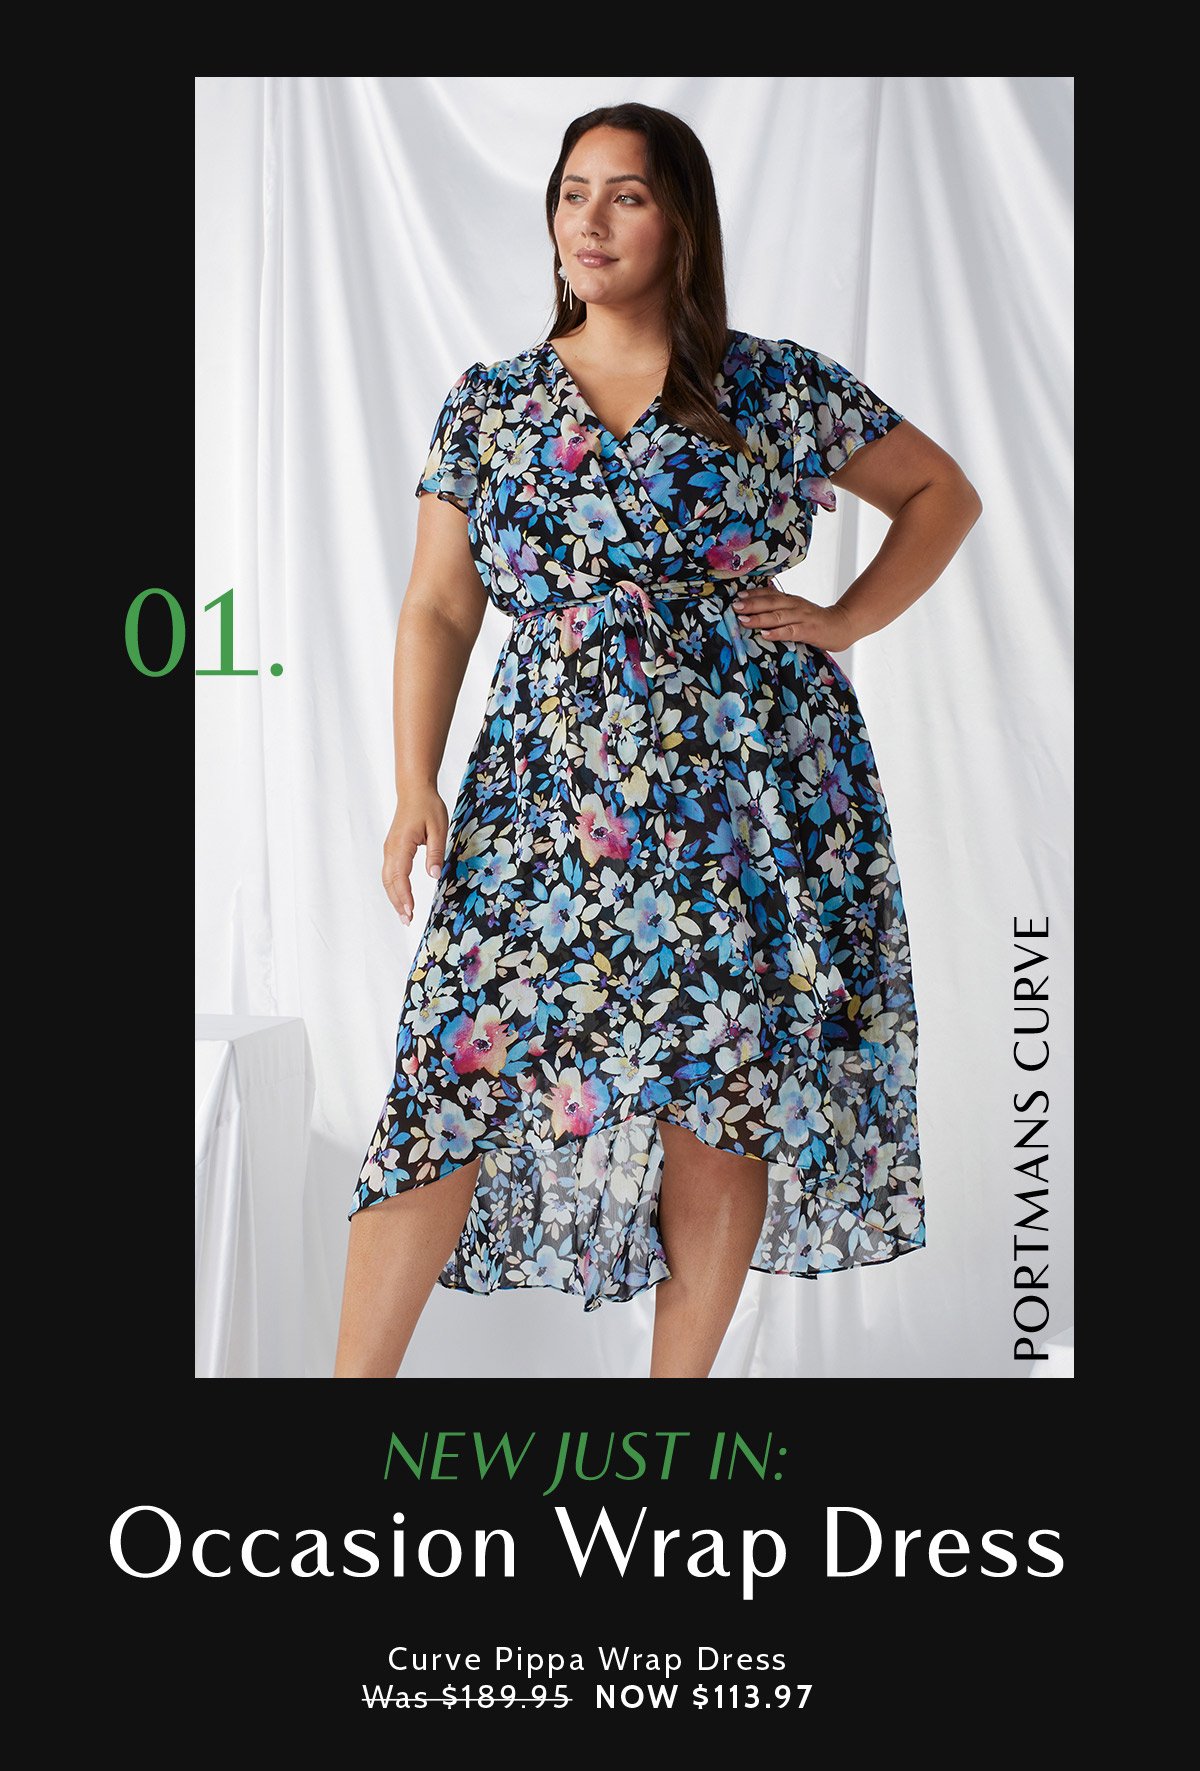 New Just in: occassion wrap dress.Curve Pippa Wrap Dress Was $189.95  NOW $113.97